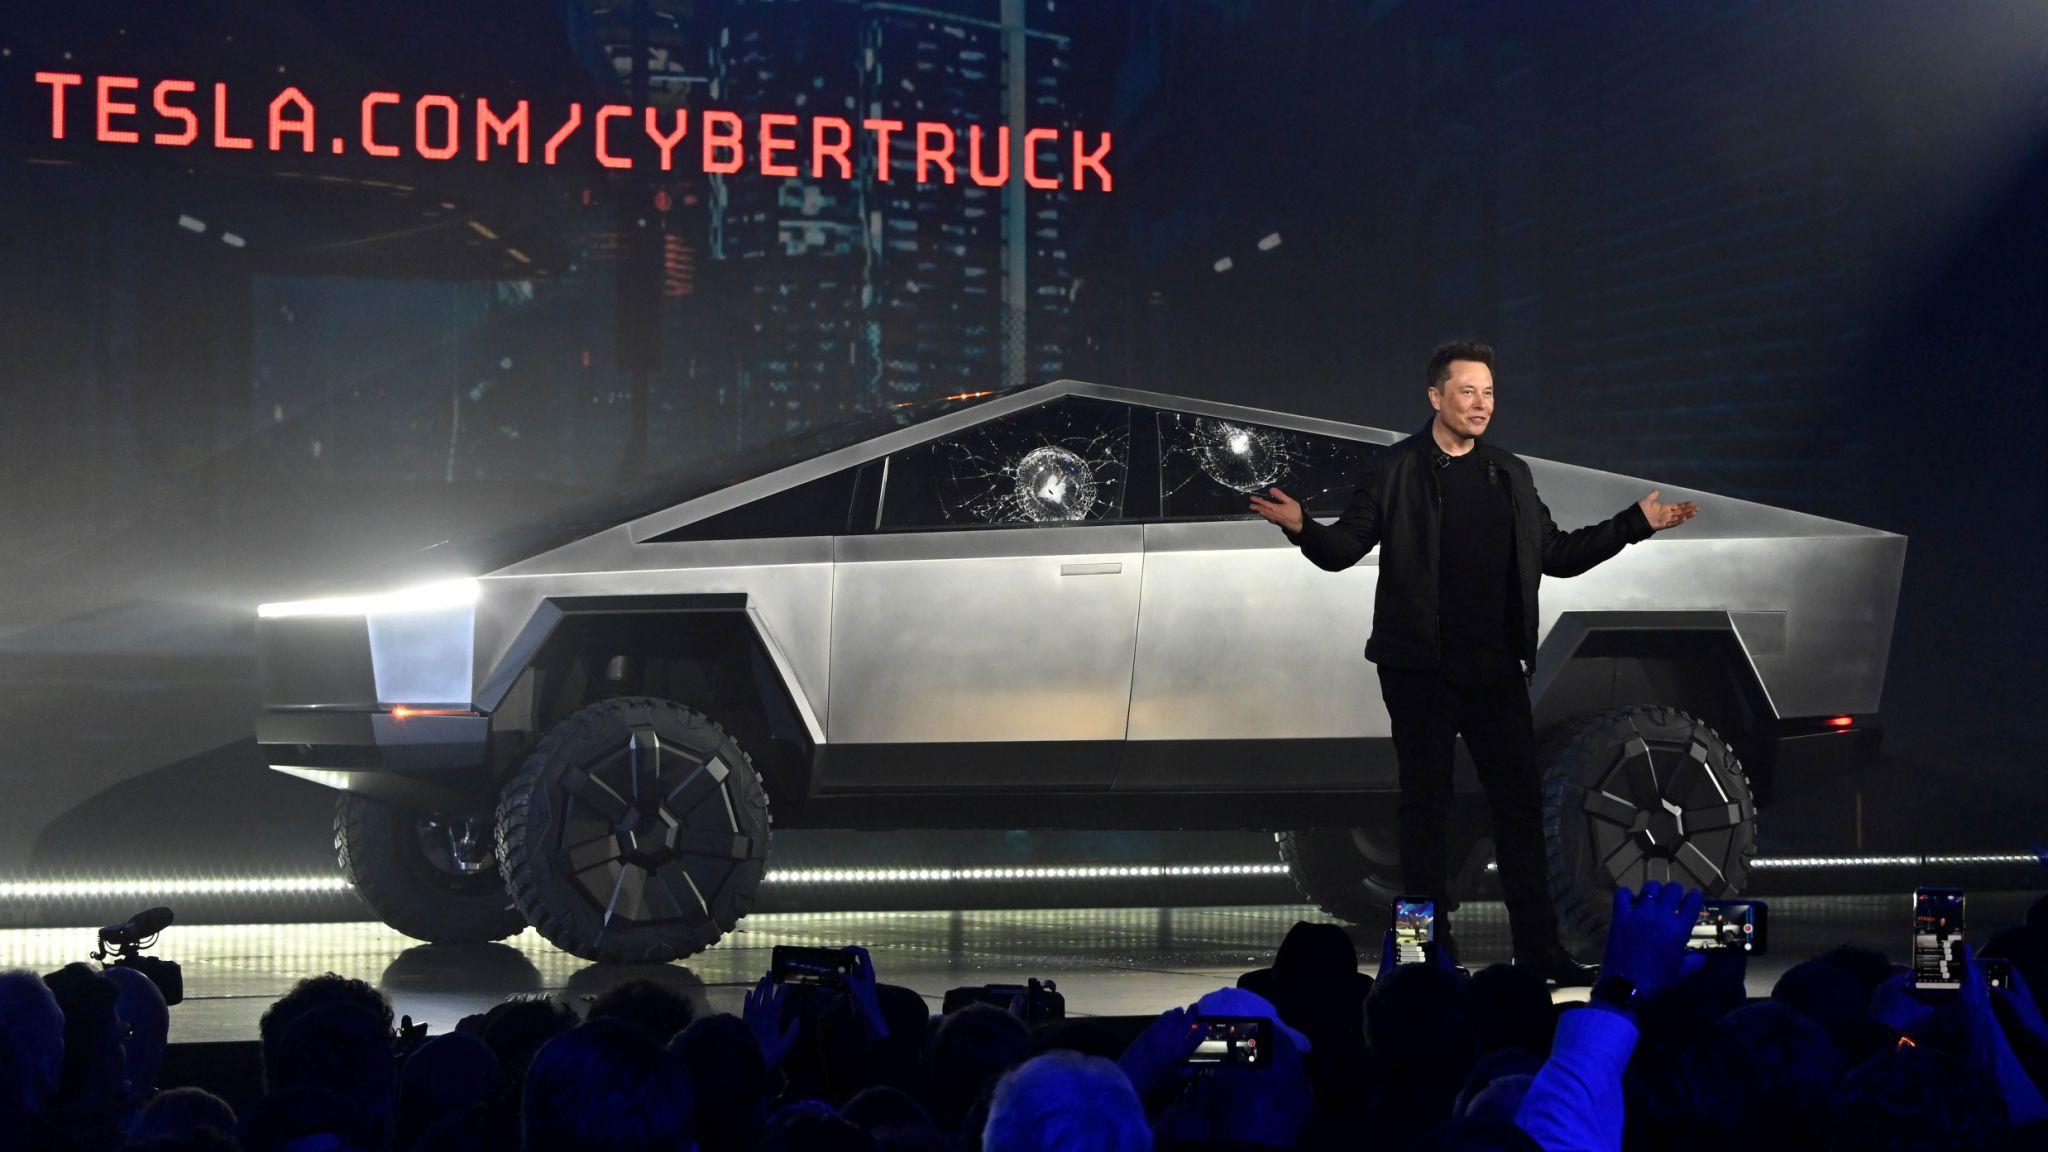 Tesla Cybertruck Wallpapers, Images, Backgrounds, Photos and Pictures